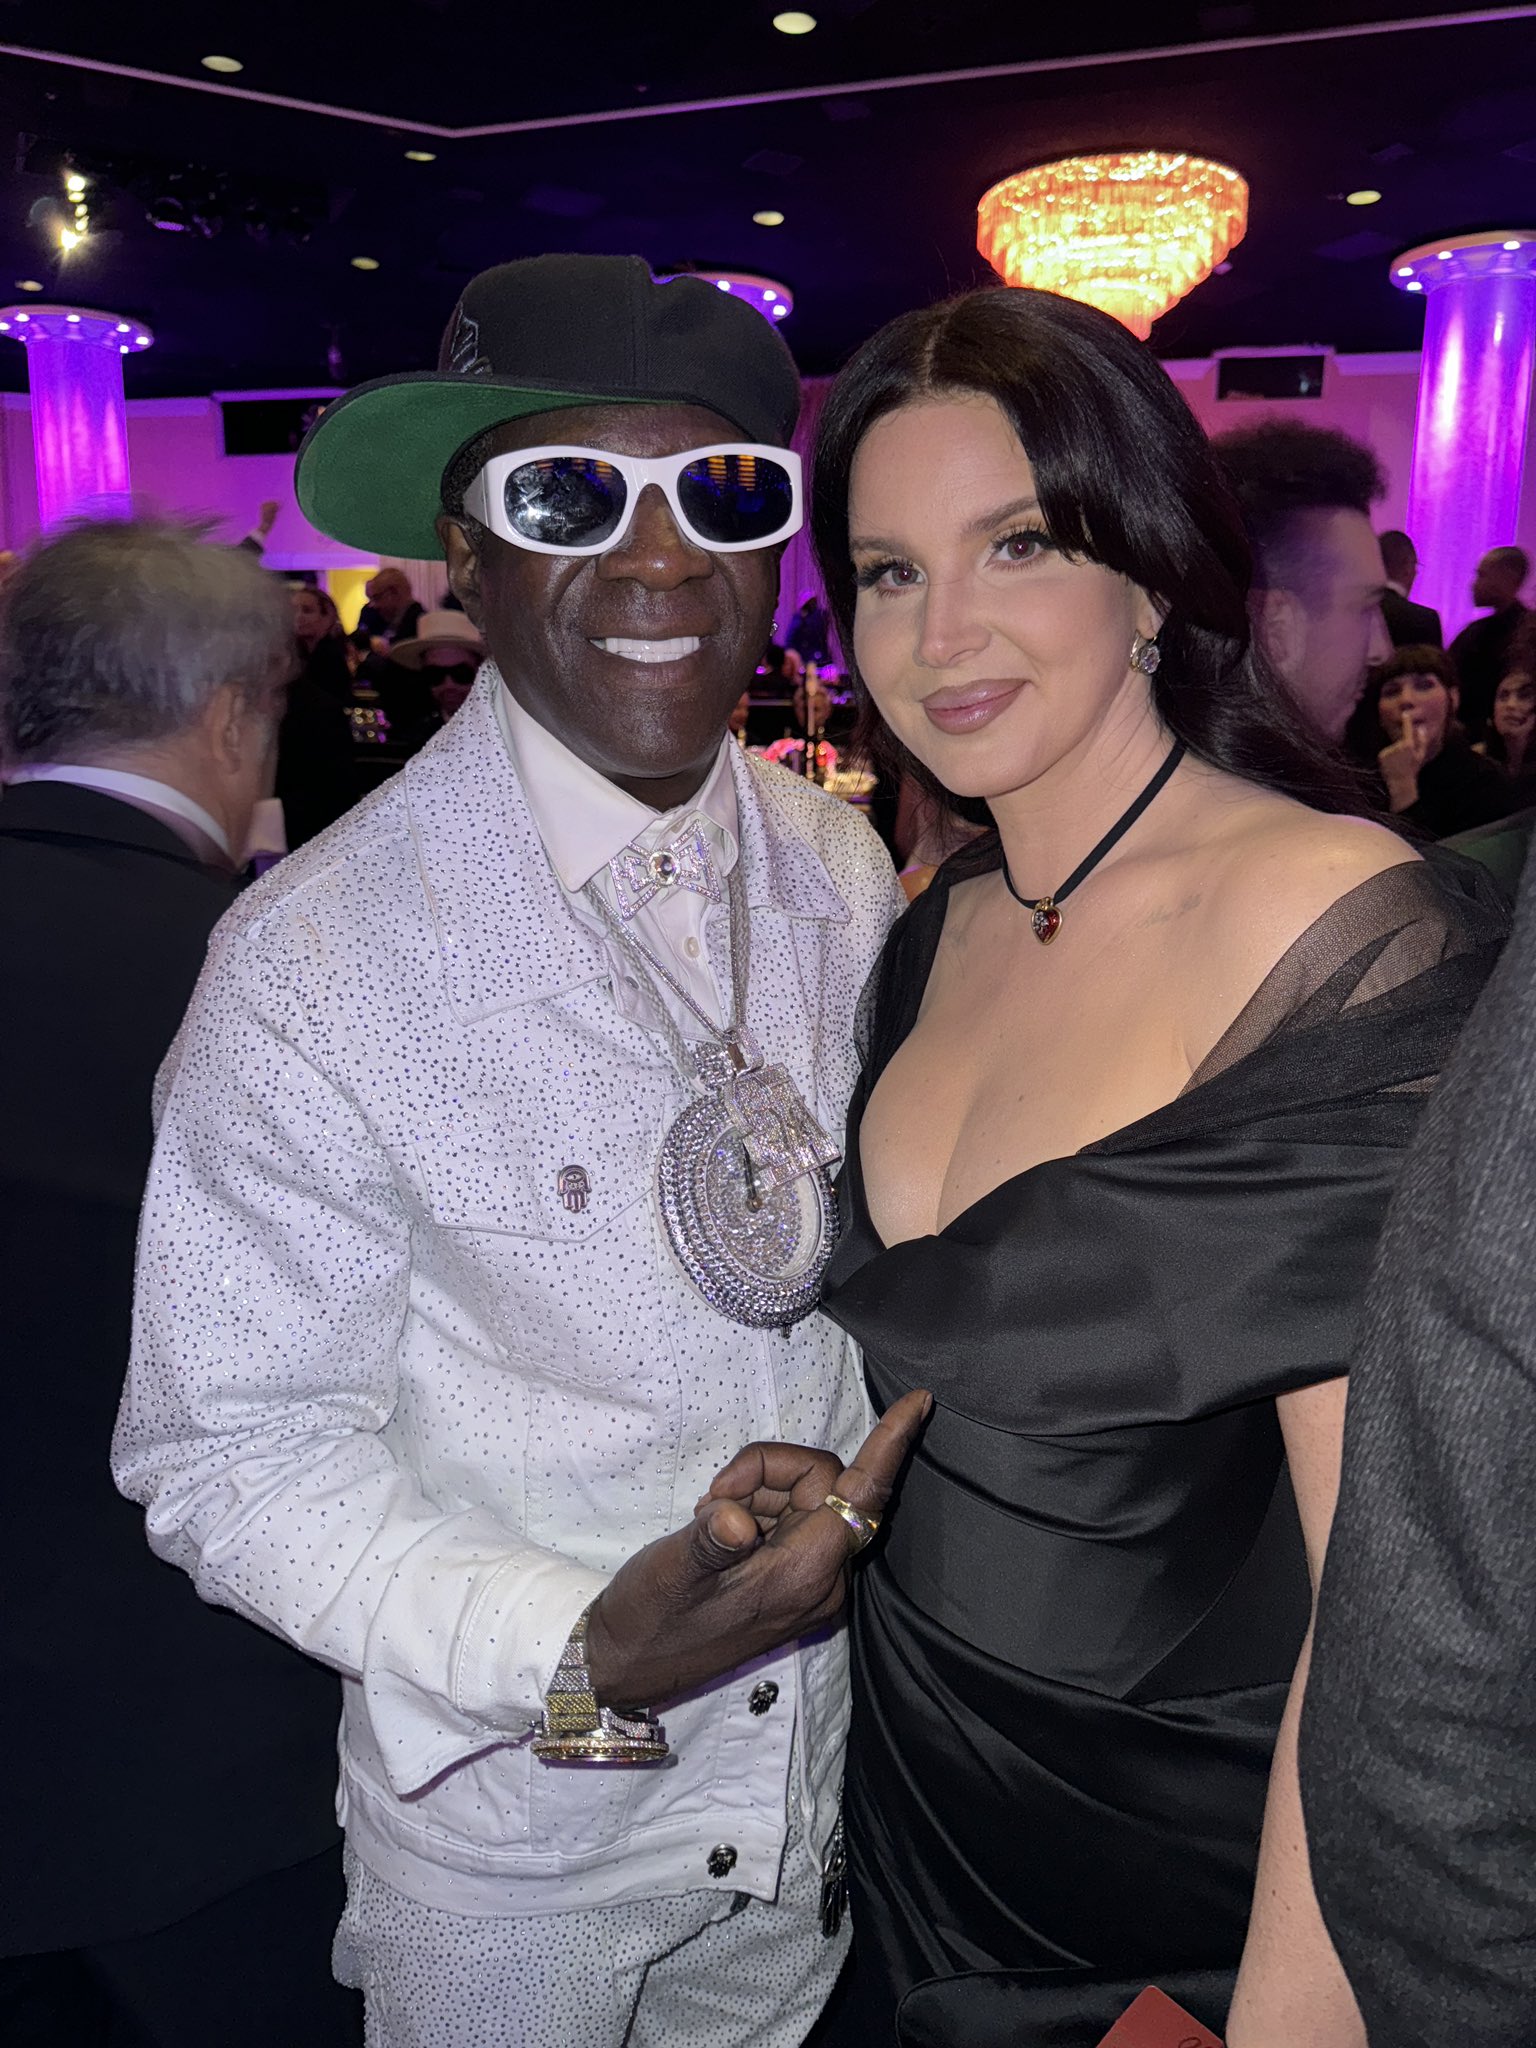 FLAVOR FLAV on X: Wintertime Happiness with Lana Del Rey #CliveDavis  Grammys Gala  / X